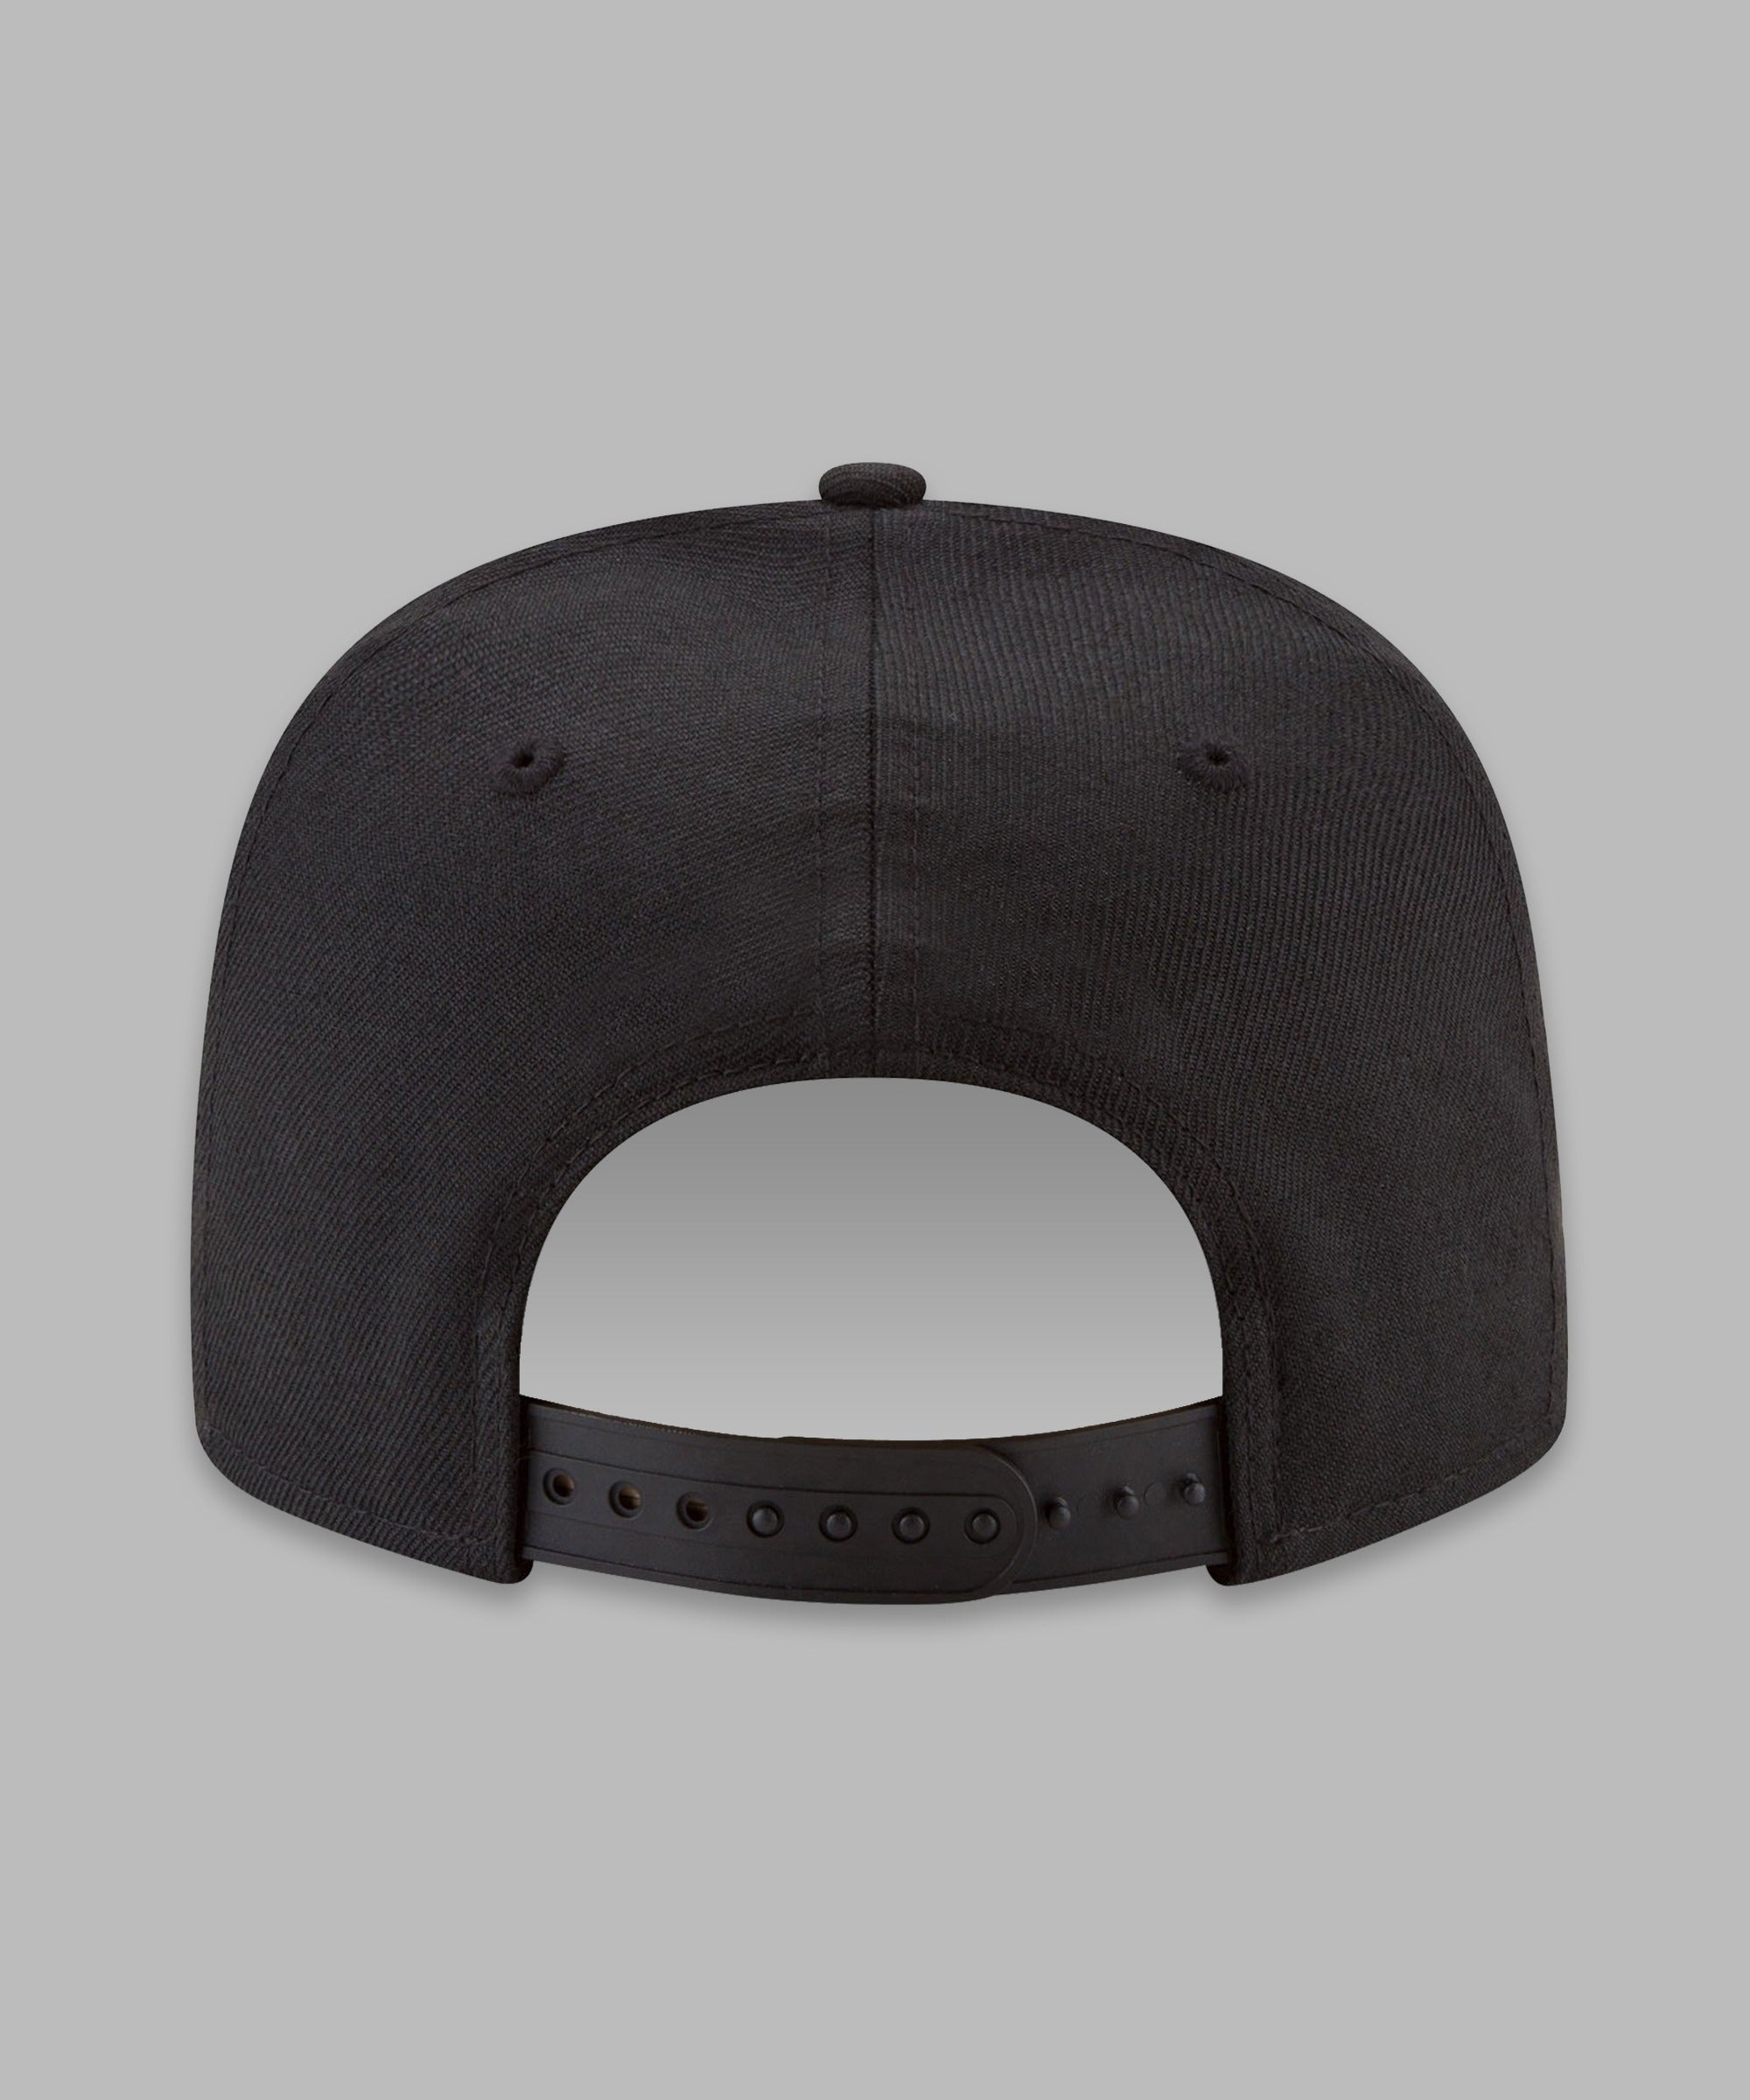 THE ORIGINAL CROWN OLD SCHOOL SNAPBACK WITH BLACK UNDERVISOR — embroidery area